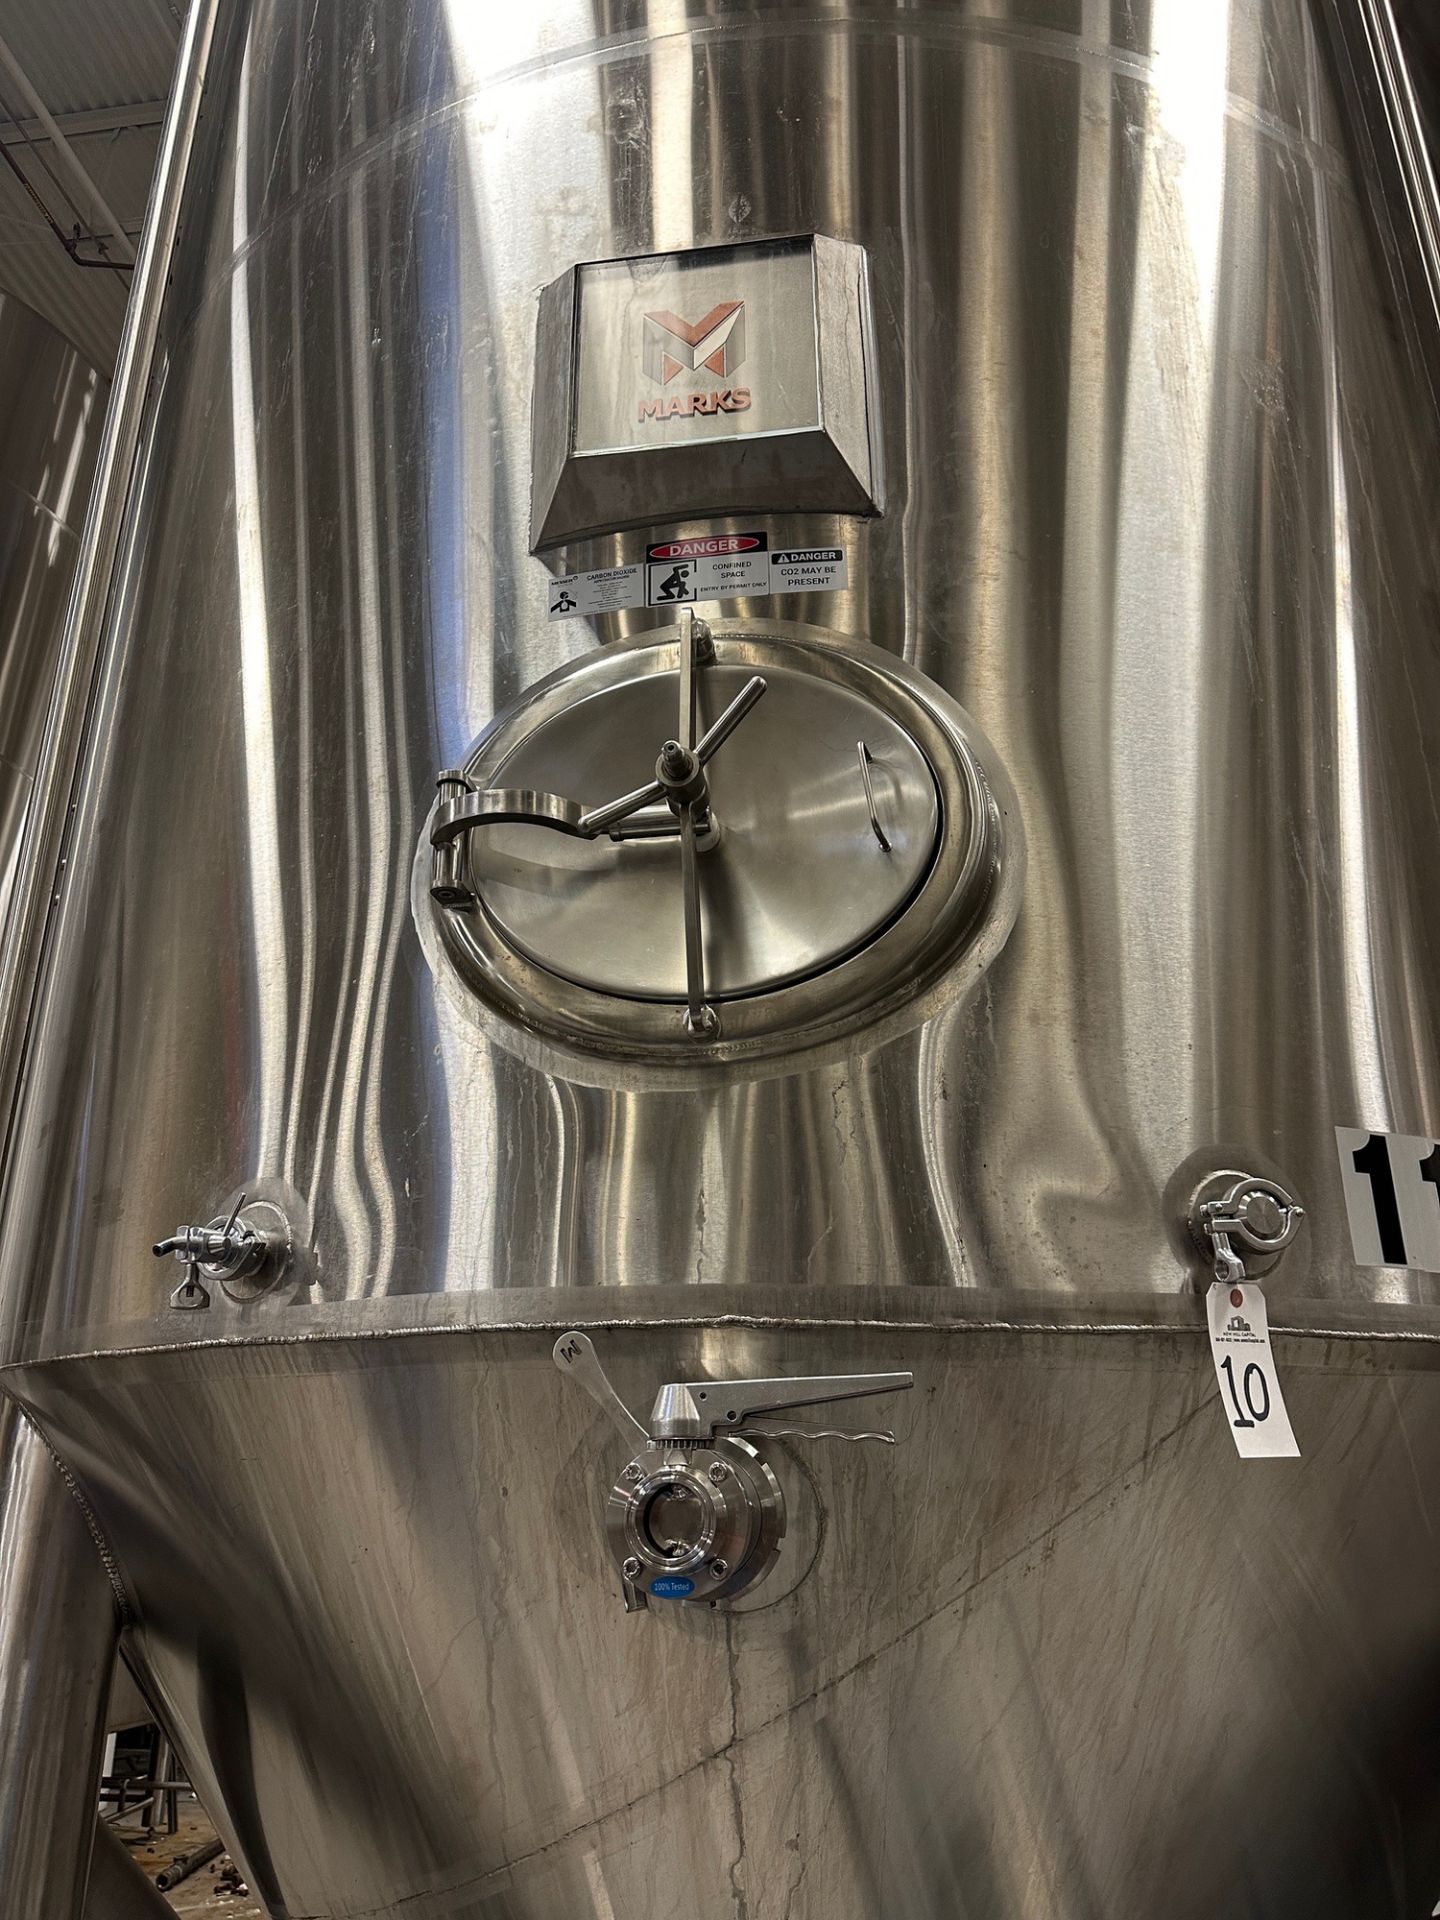 (1 of 8) 2020 Marks 132 BBL FV / 175 BBL or 5,400 Gal Max Capacity Jacketed Stainless Steel Ferm - Bild 2 aus 5